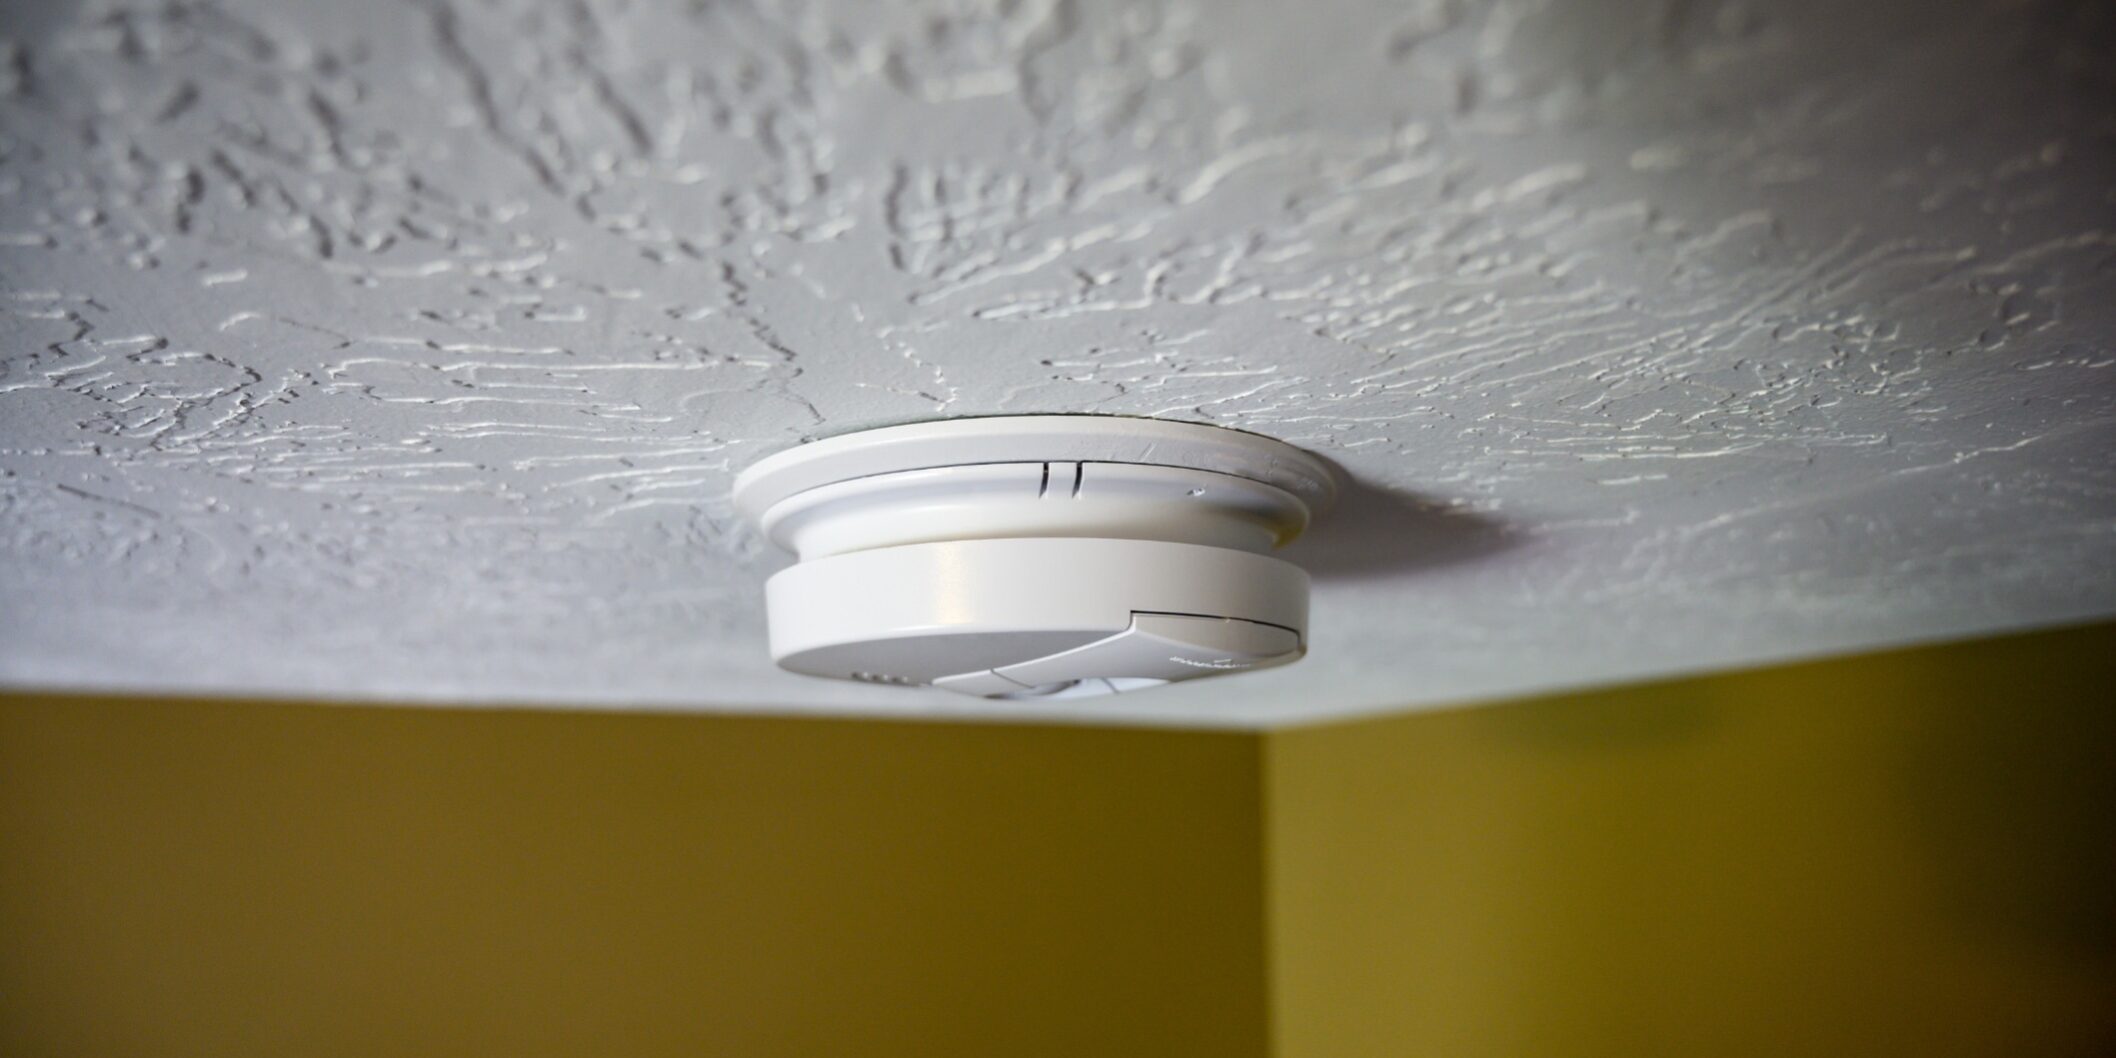 How to Test Smoke Detector